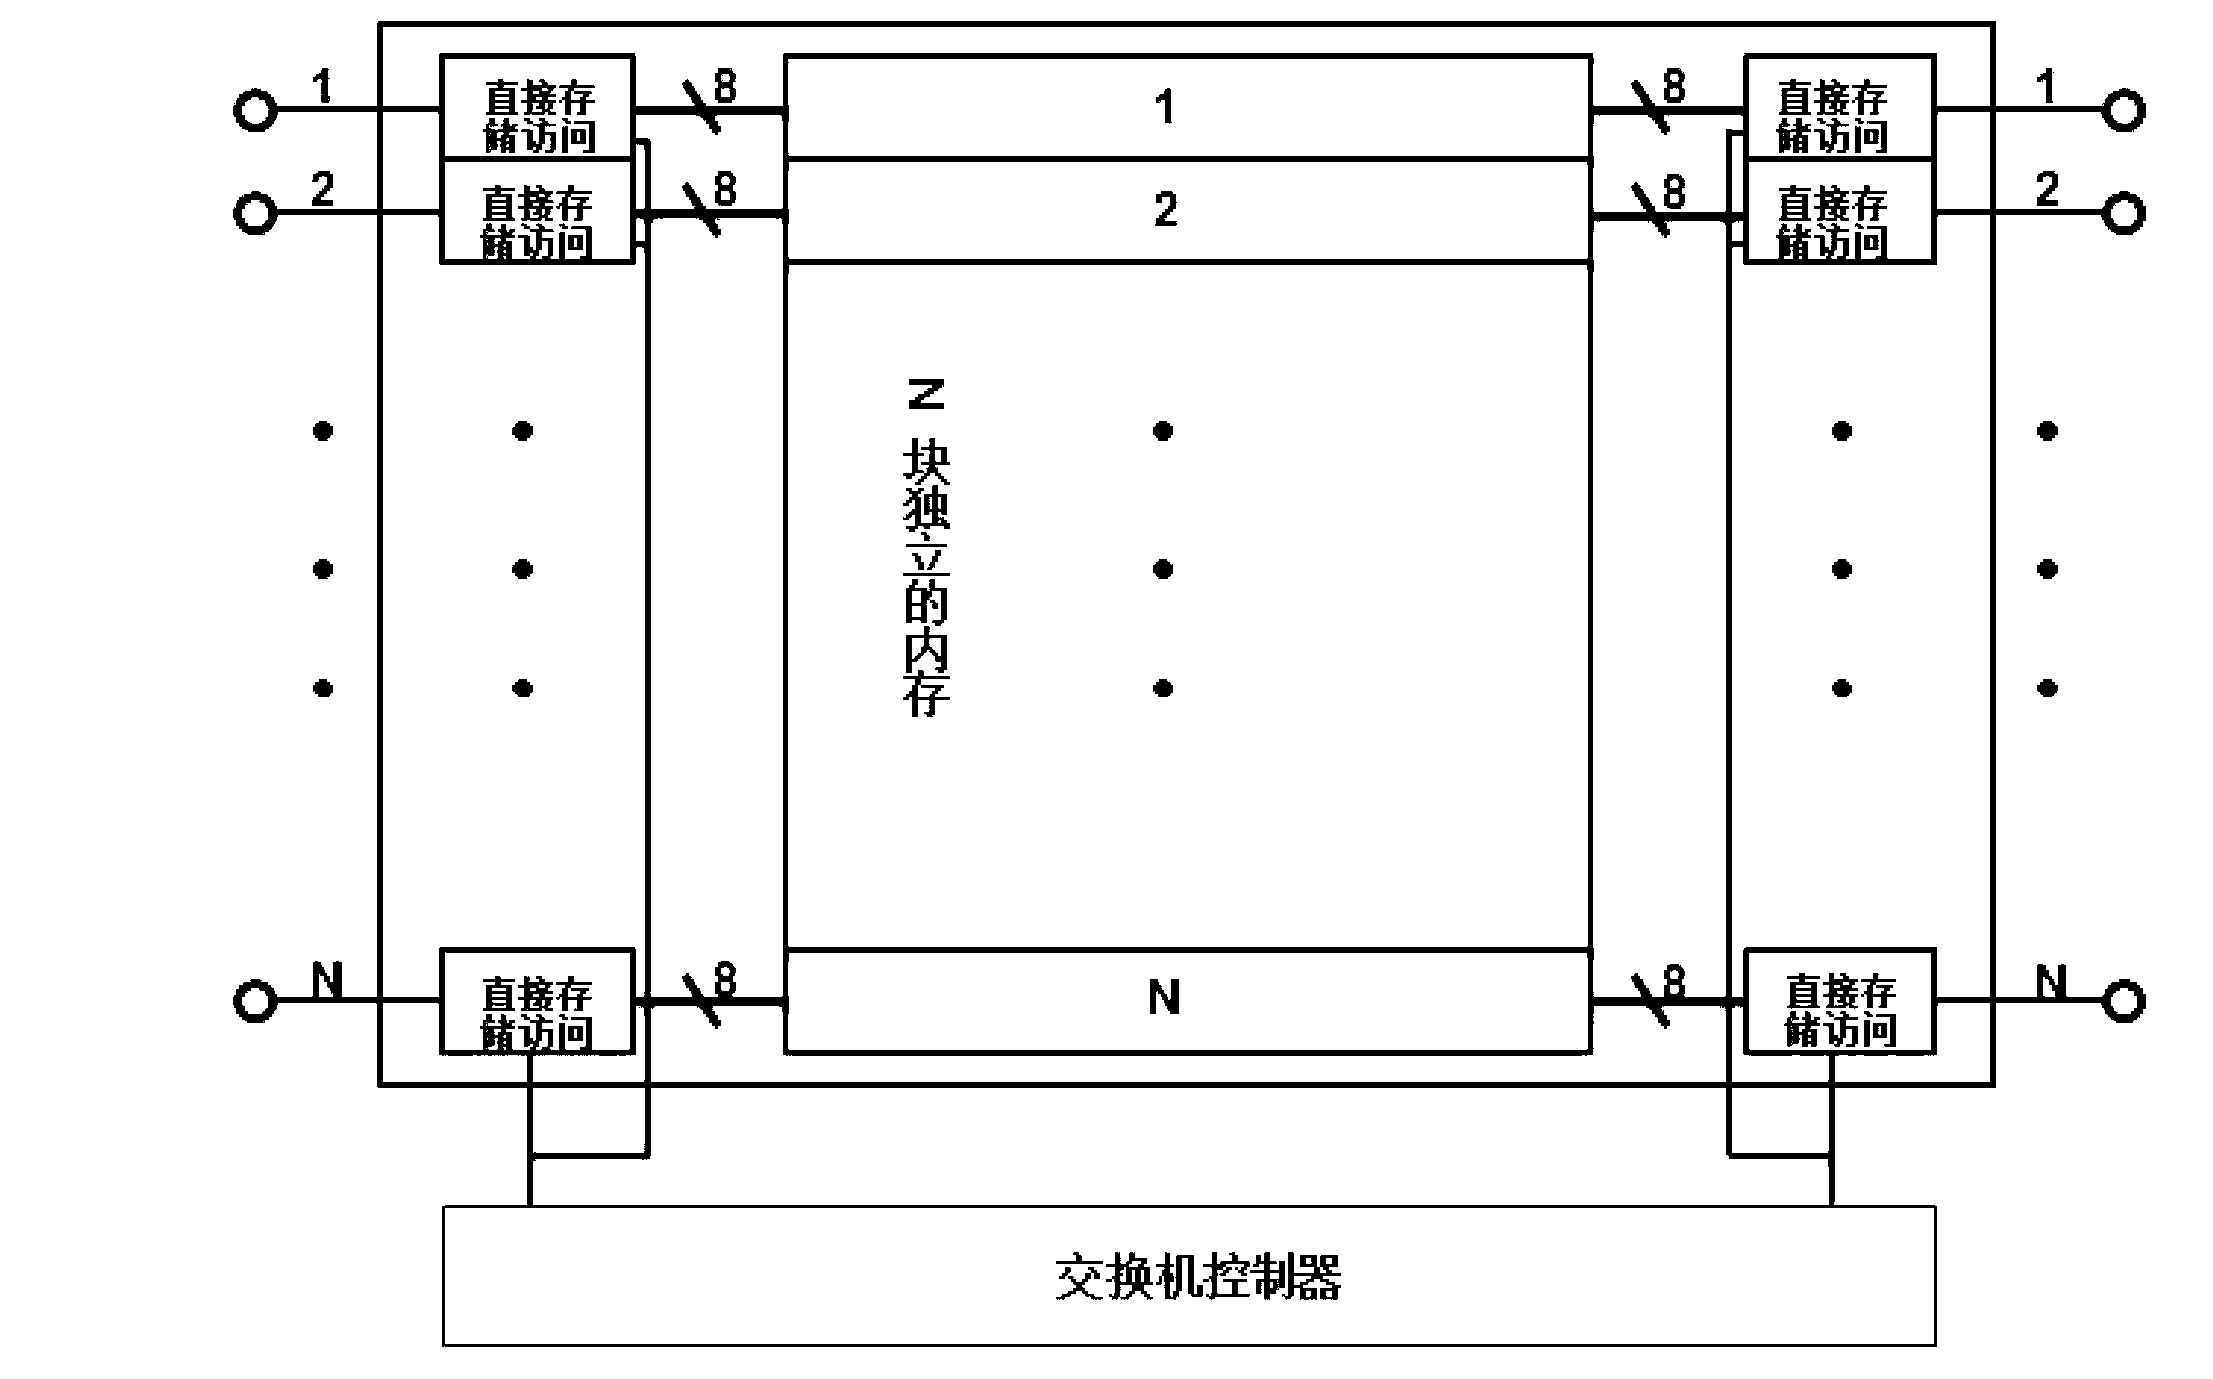 AFDX (avionics full-duplex switch Ethernet) network switch with time-space separation characteristic